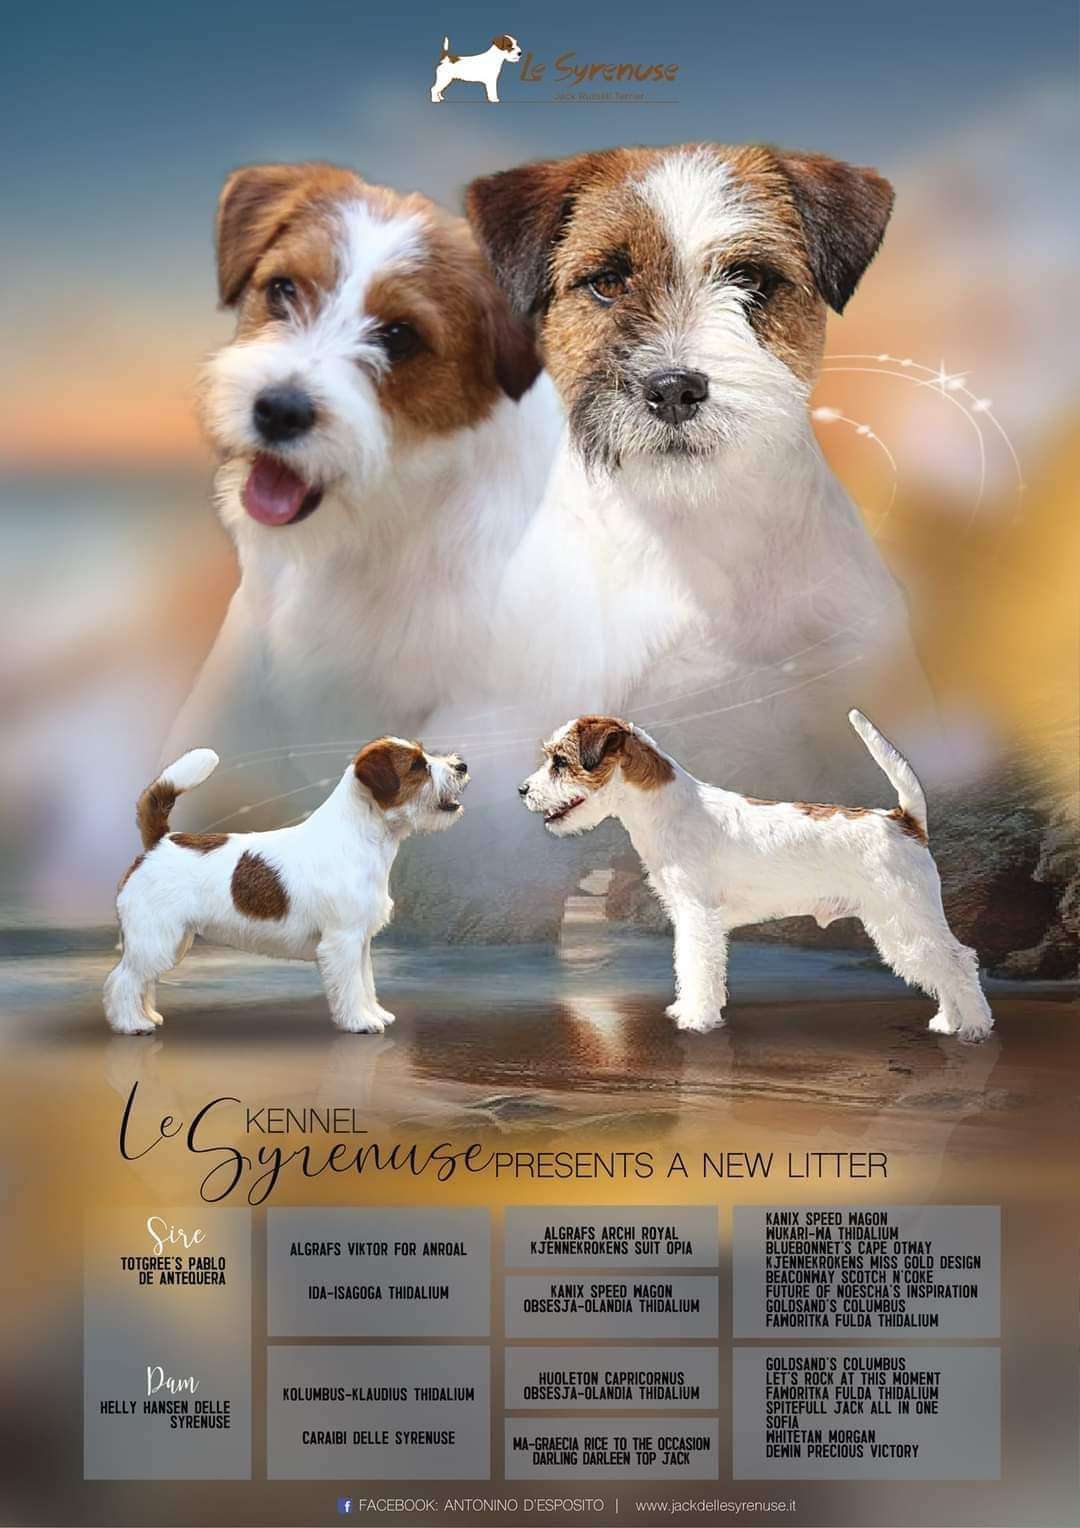 Jack Russell Terrier Breeder in Scotland and the UK